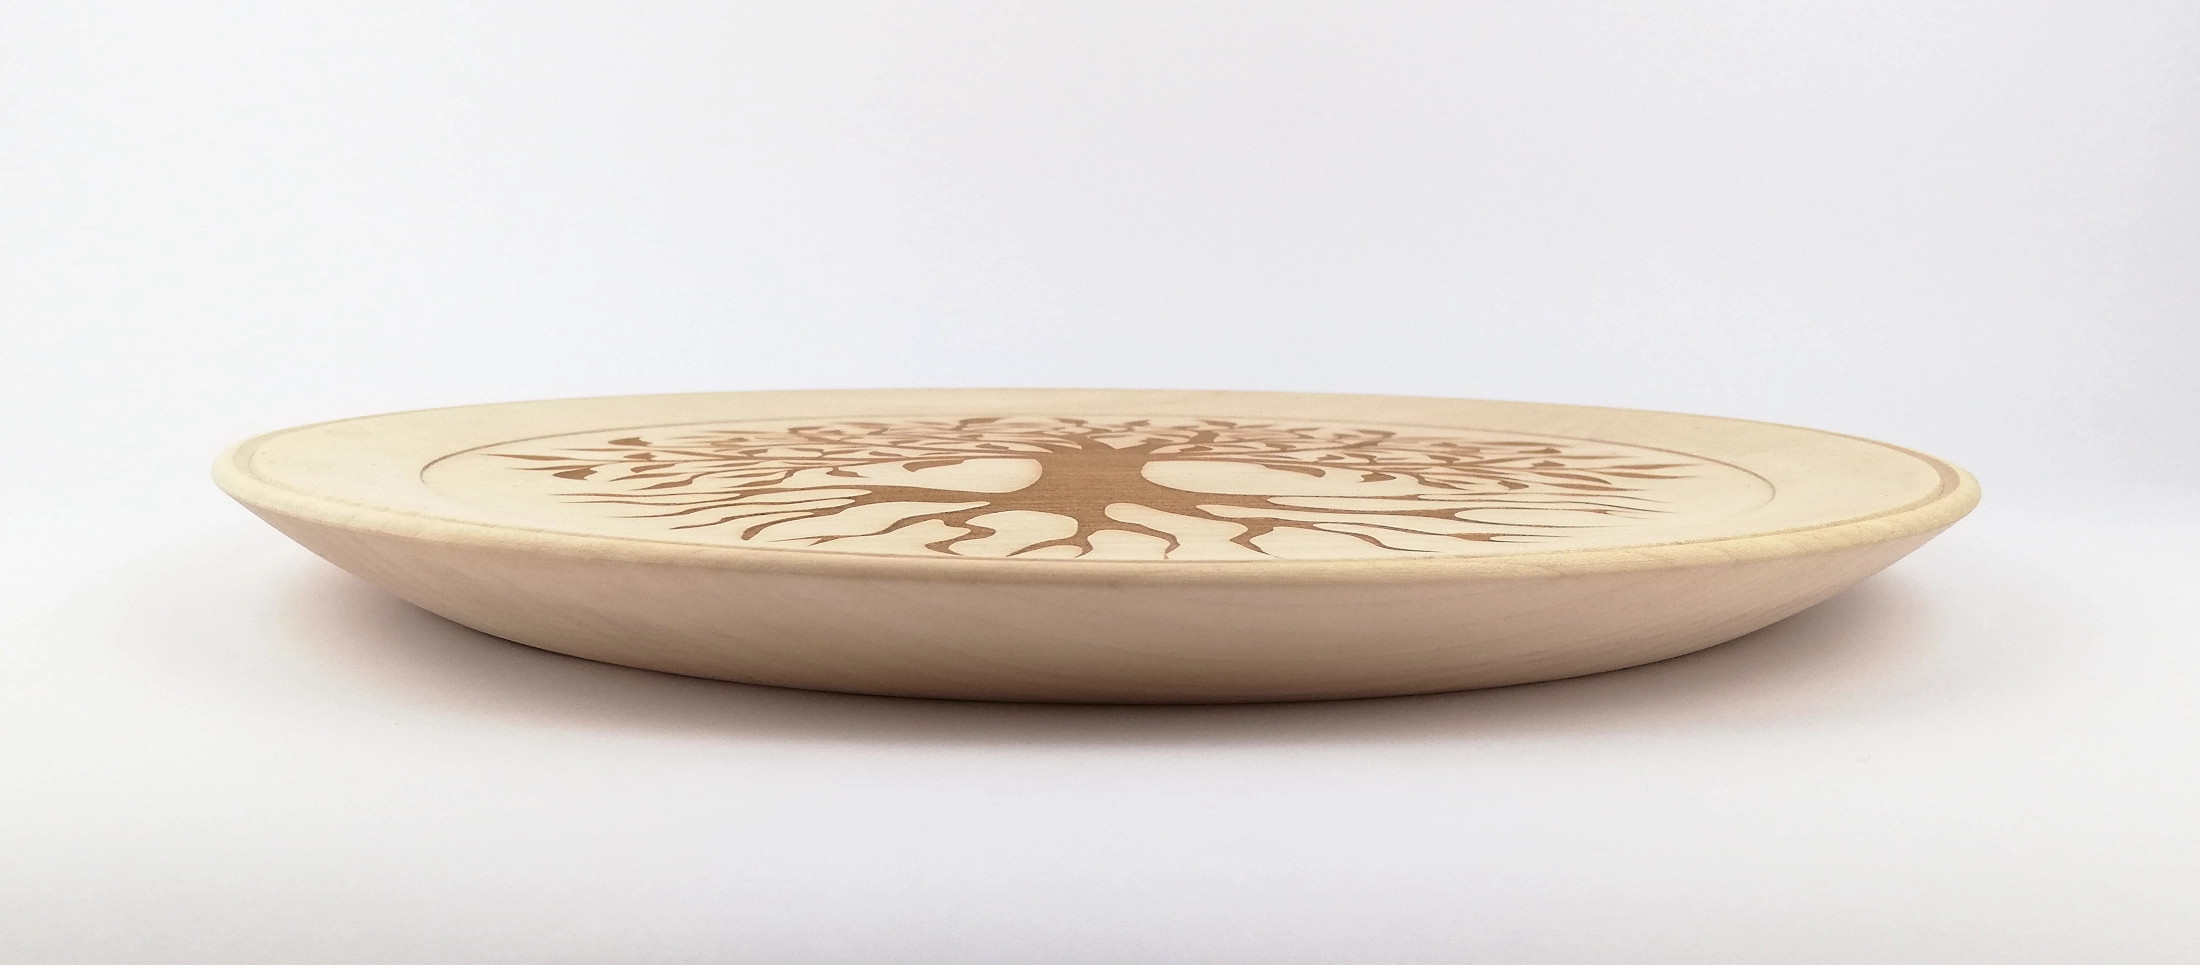 Tree of life (version 1) on a big plate (32cm/12.6in in diameter), bottom.